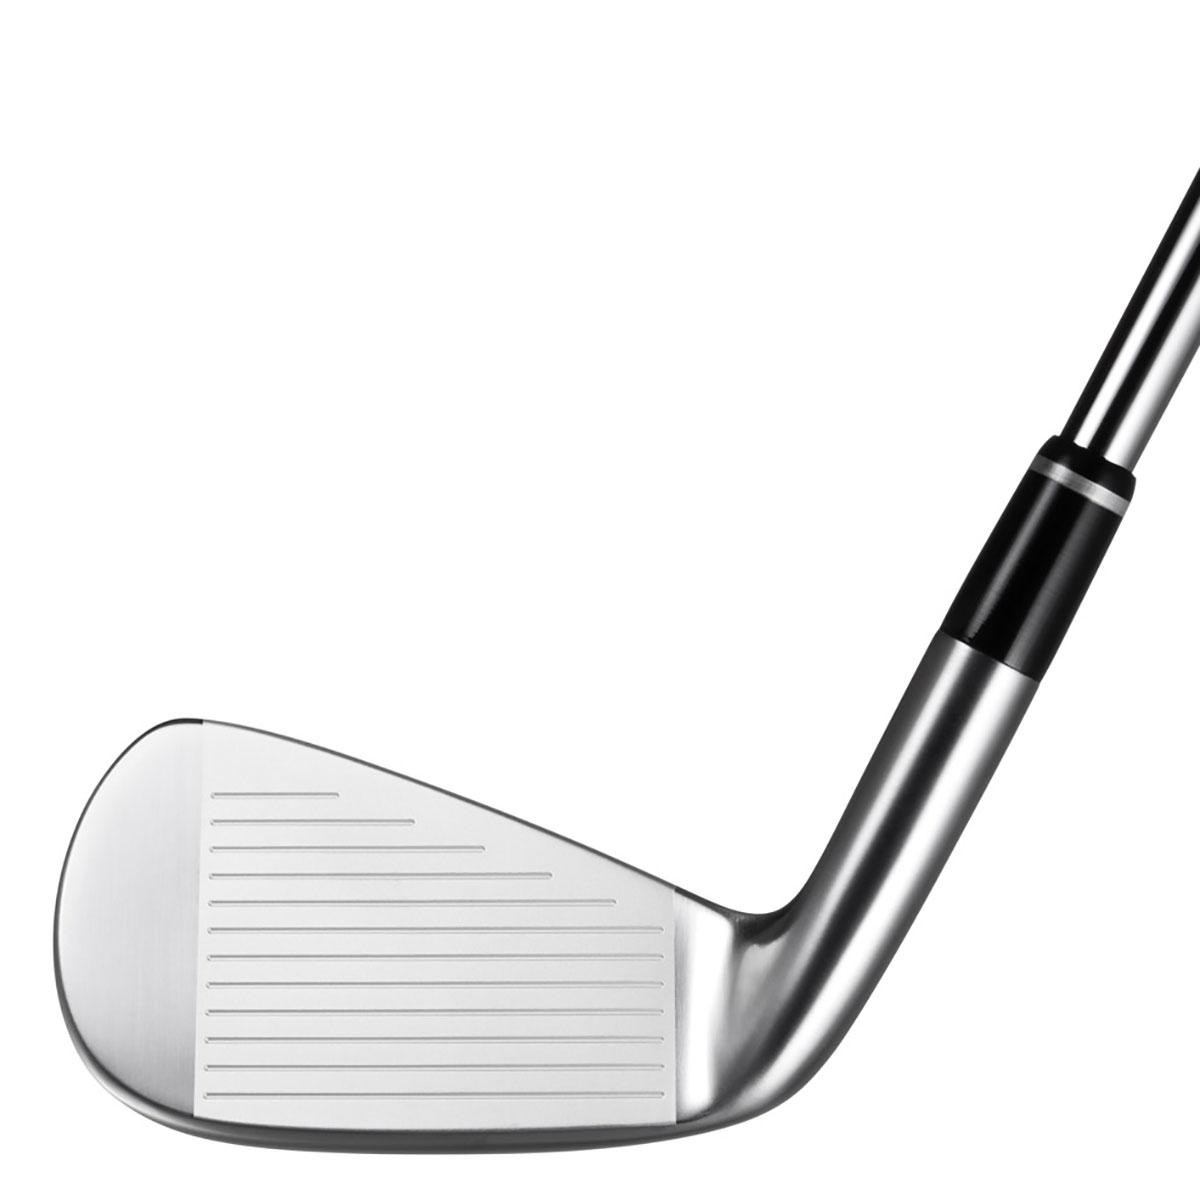  PRGR RS RS forged iron (6 pcs set ) N.S.PRO specifications steel III ver.2 shaft :N.S.PRO specifications steel III ver.2